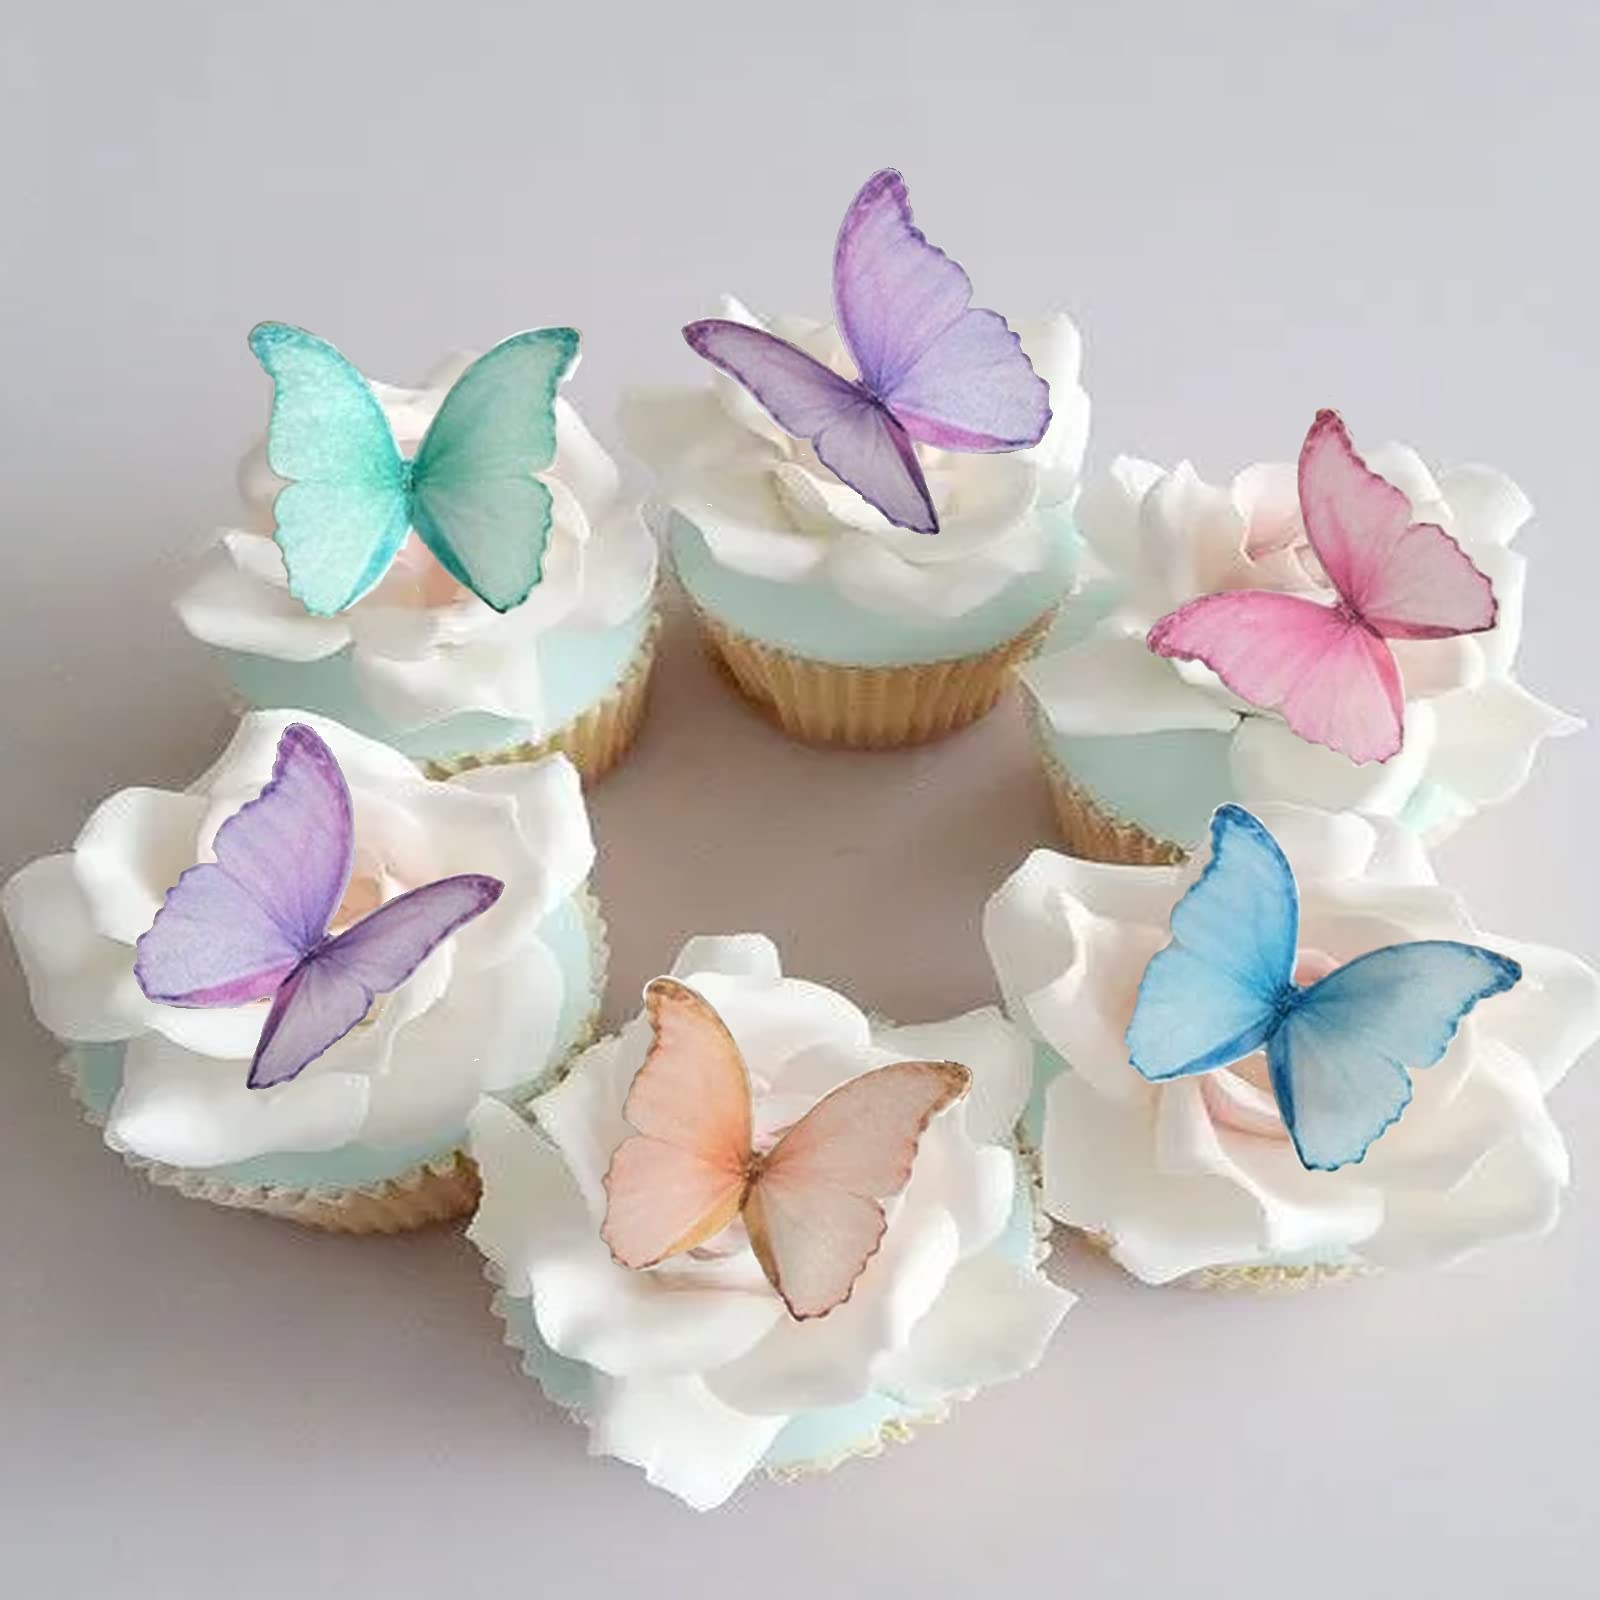 GEORLD Edible Wafer Paper Butterflies Set of 48 Purple Colorful Cake  Decorations, Cupcake Topper Mixed Color 5 Color Mixed